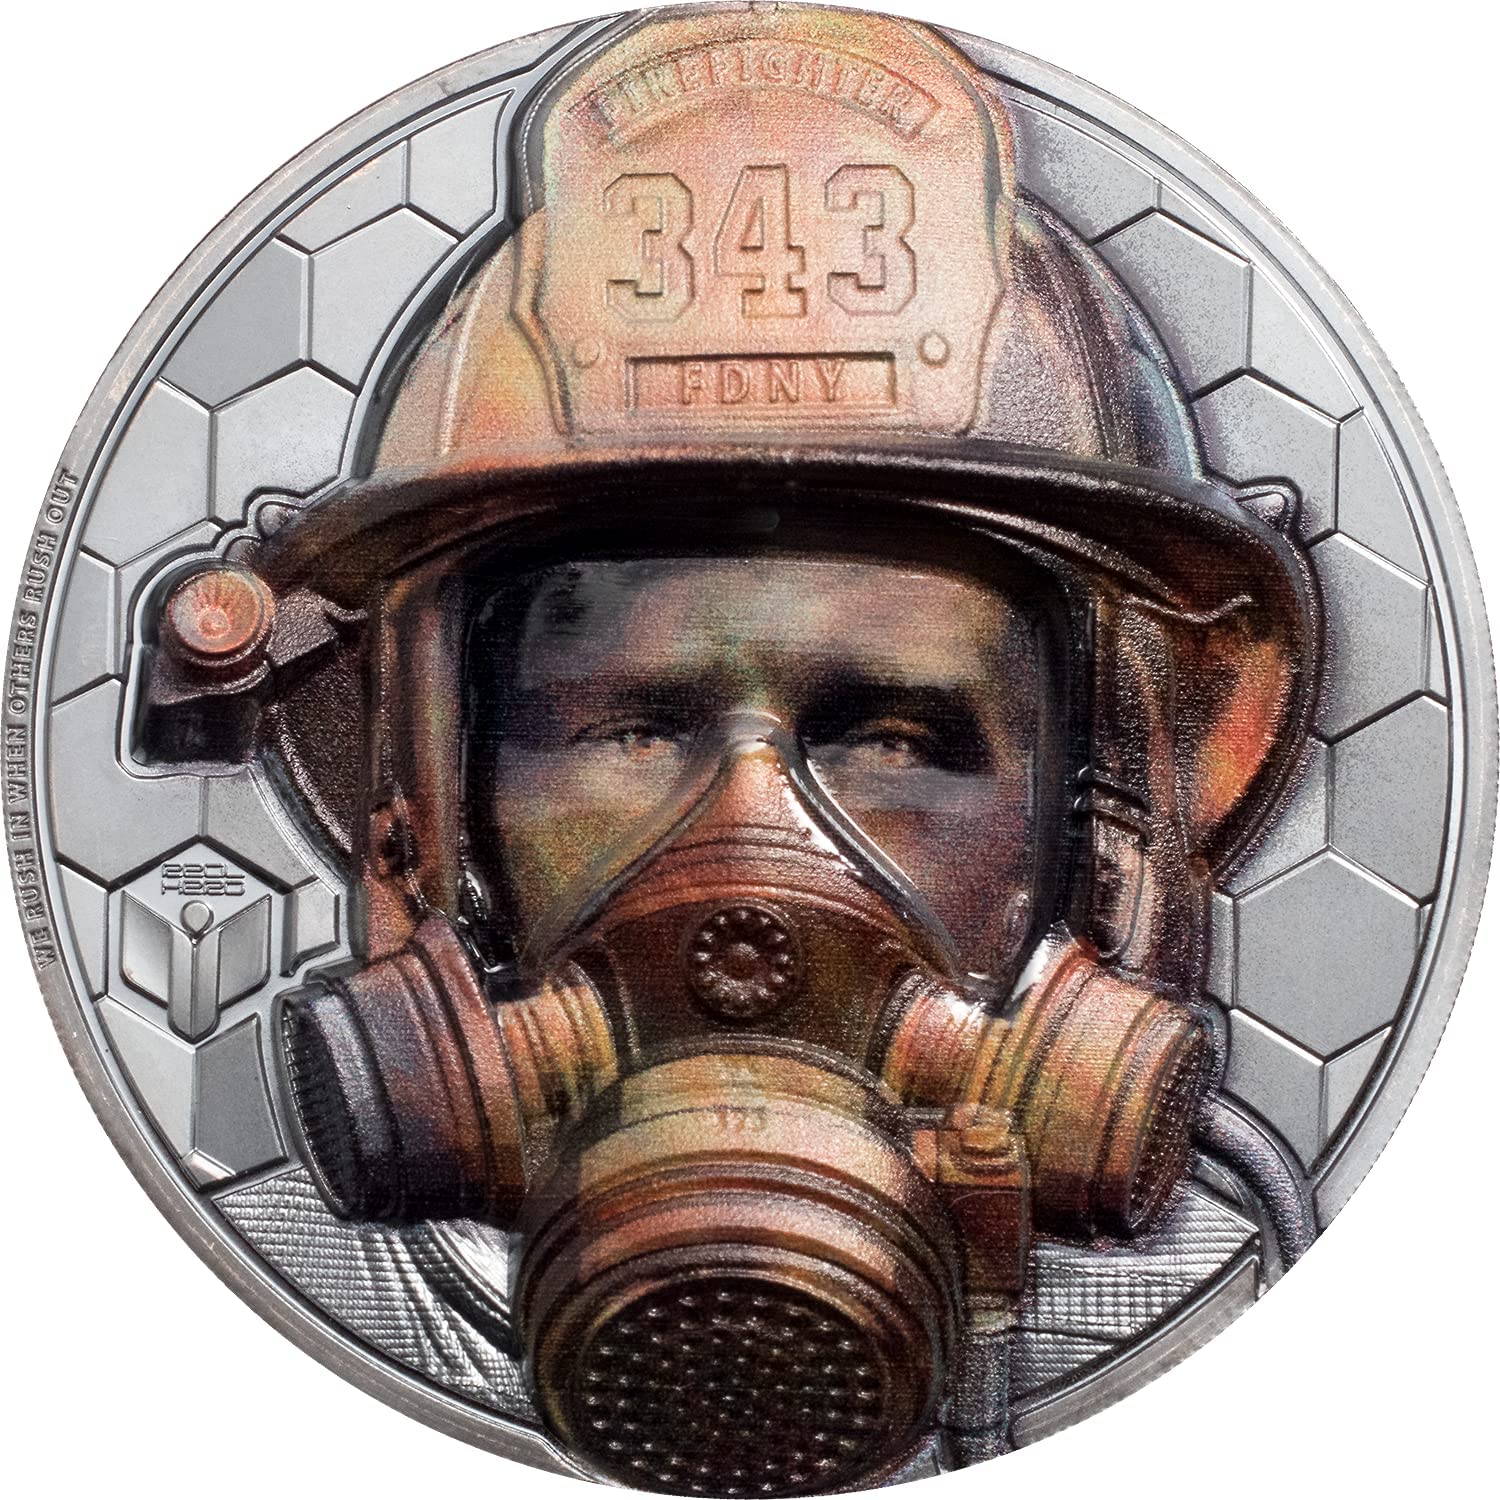 Cook Islands, 20 dollars 2021. Real Heroes - Firefighter. 3oz Silver